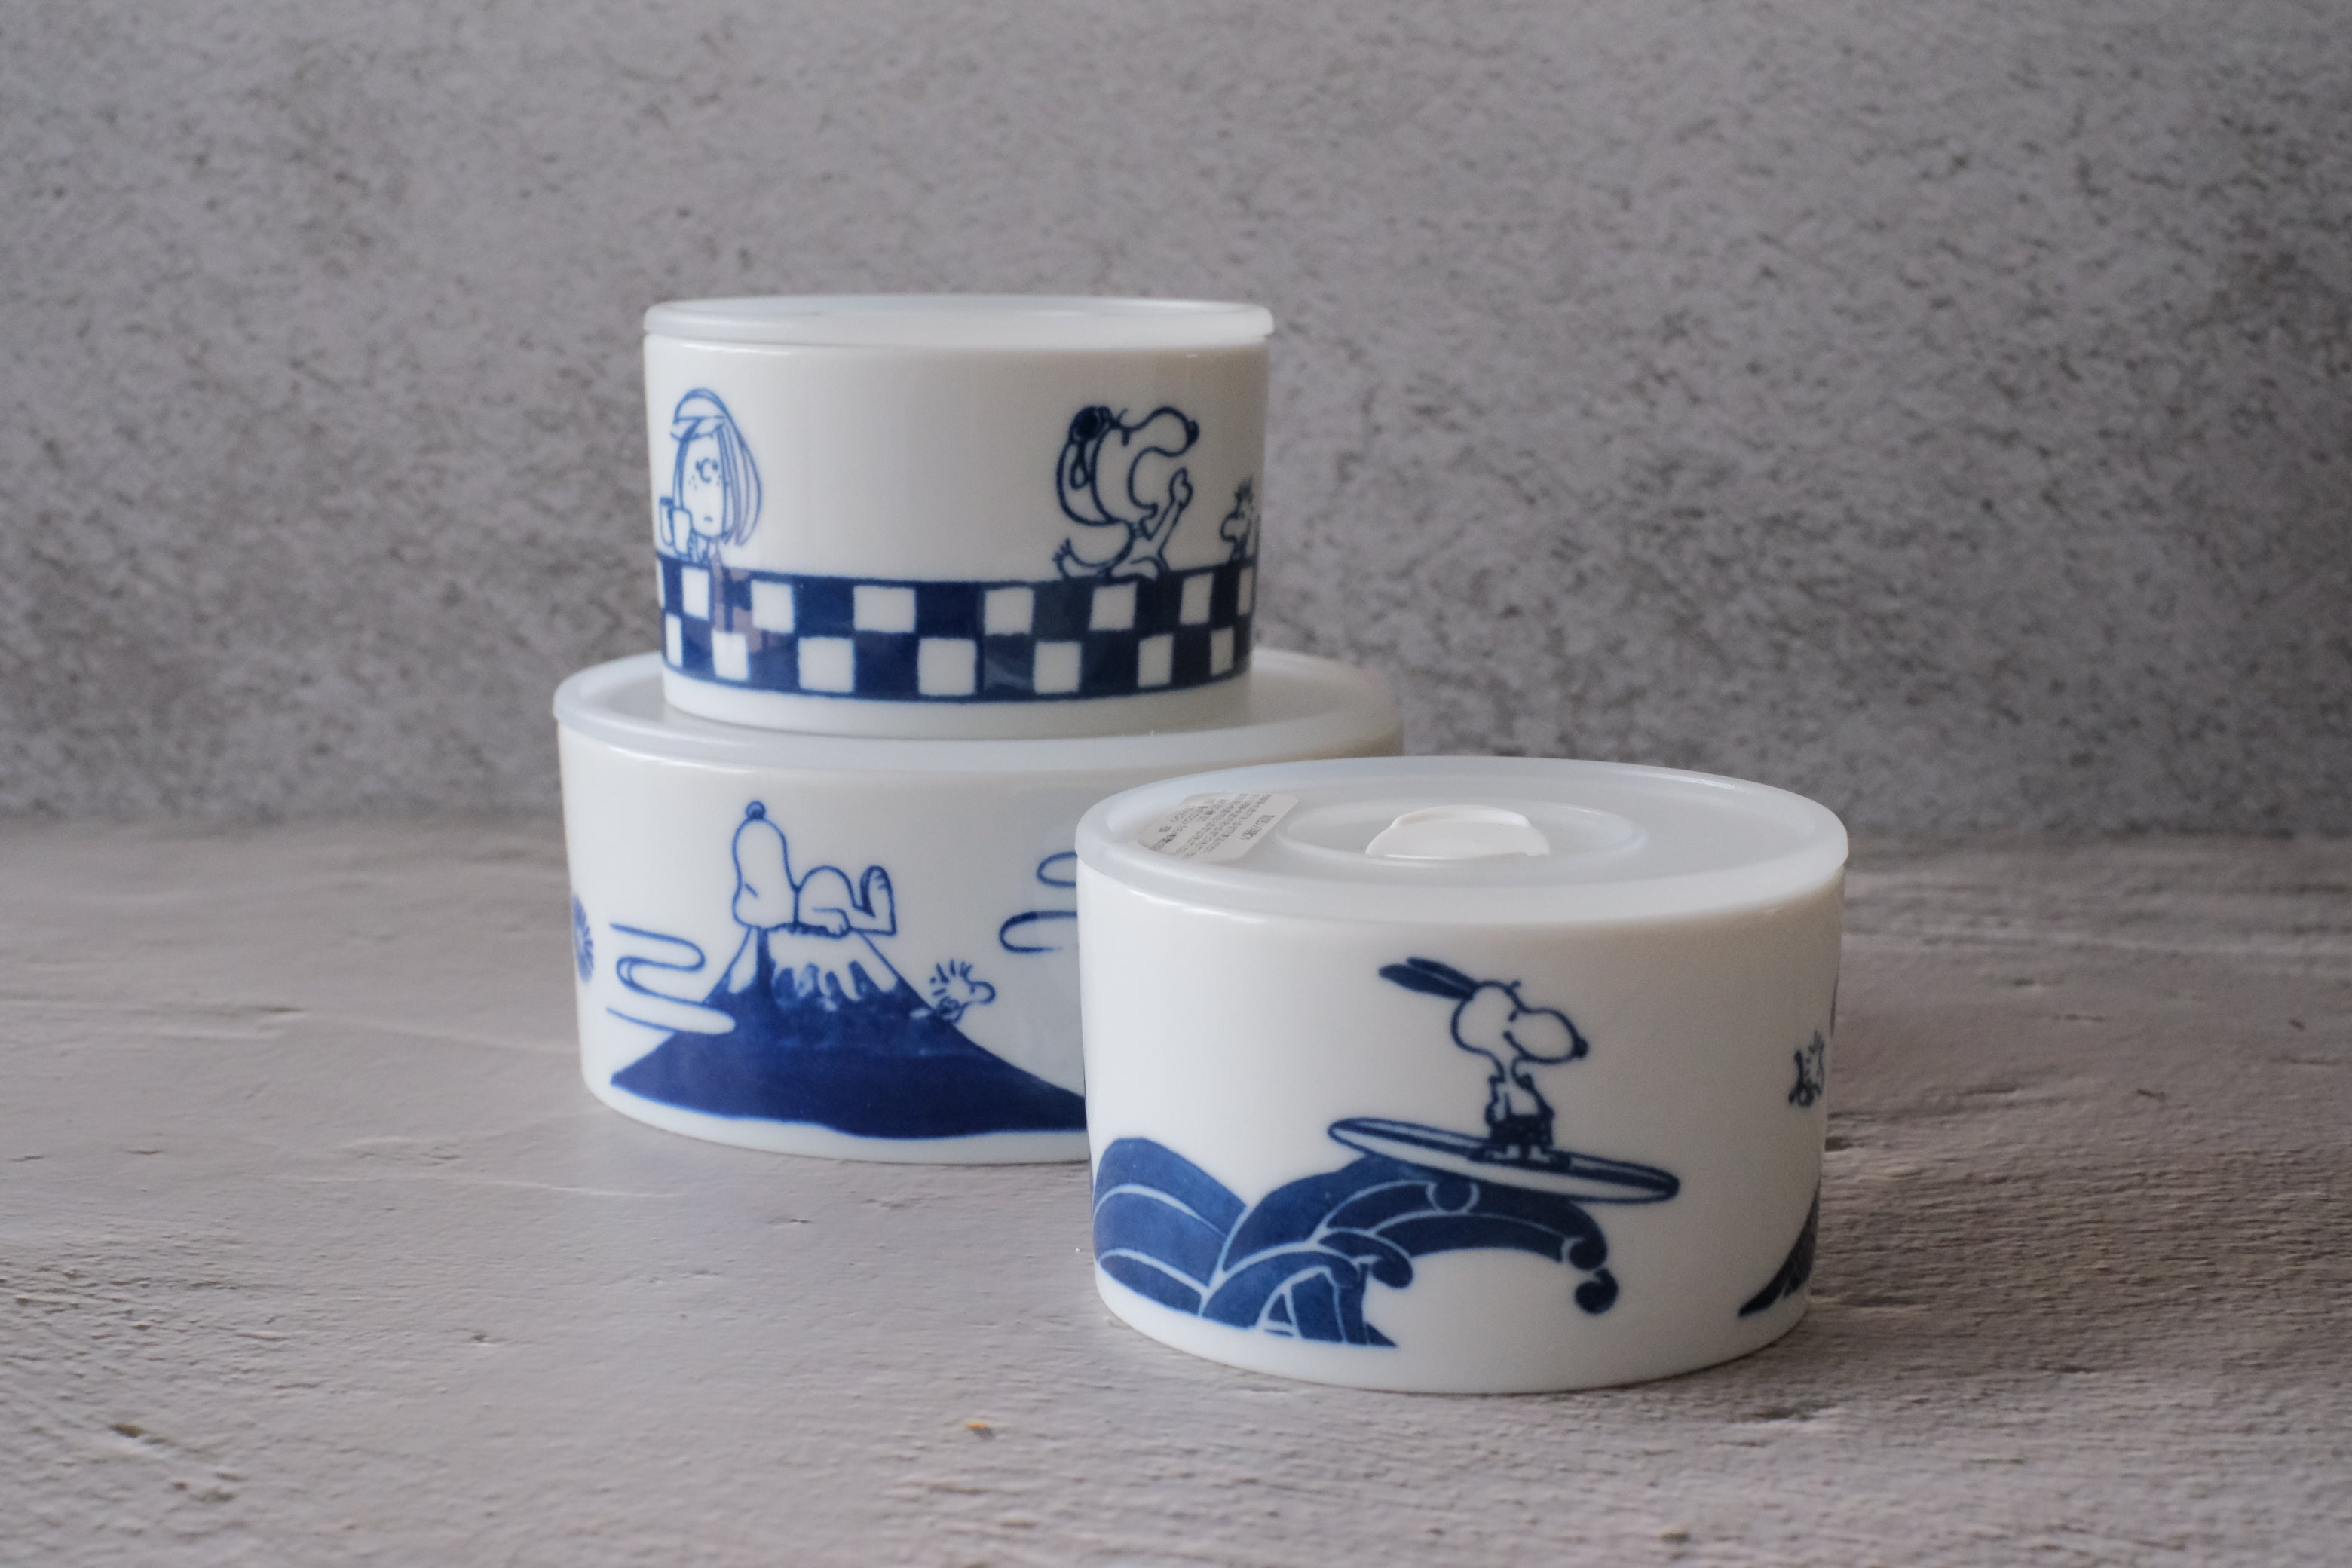 Peanuts Snoopy Japan Indigo Sometsuke 3 Piece Ceramic Airtight Storage Container/ Lunch Canister